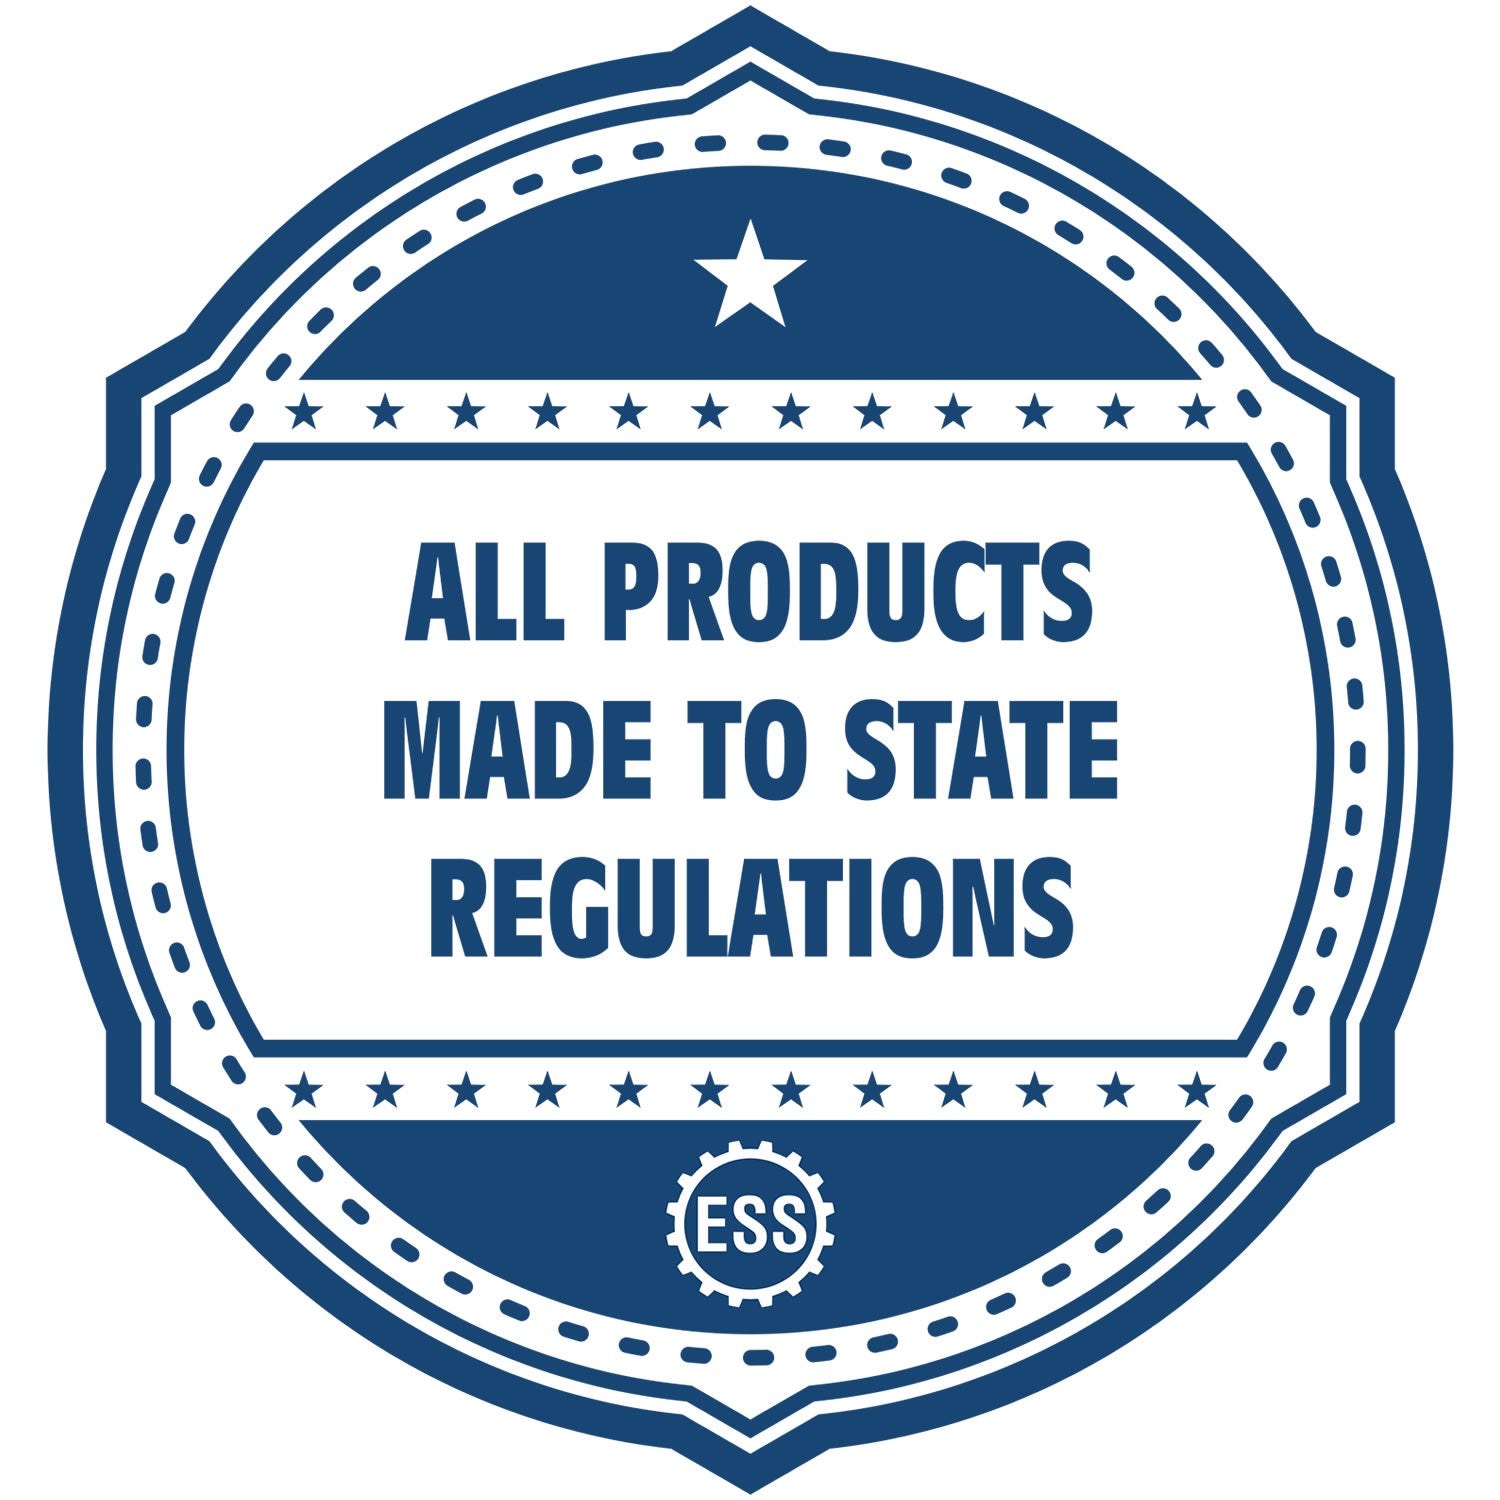 An icon or badge element for the Premium MaxLight Pre-Inked Delaware Engineering Stamp showing that this product is made in compliance with state regulations.